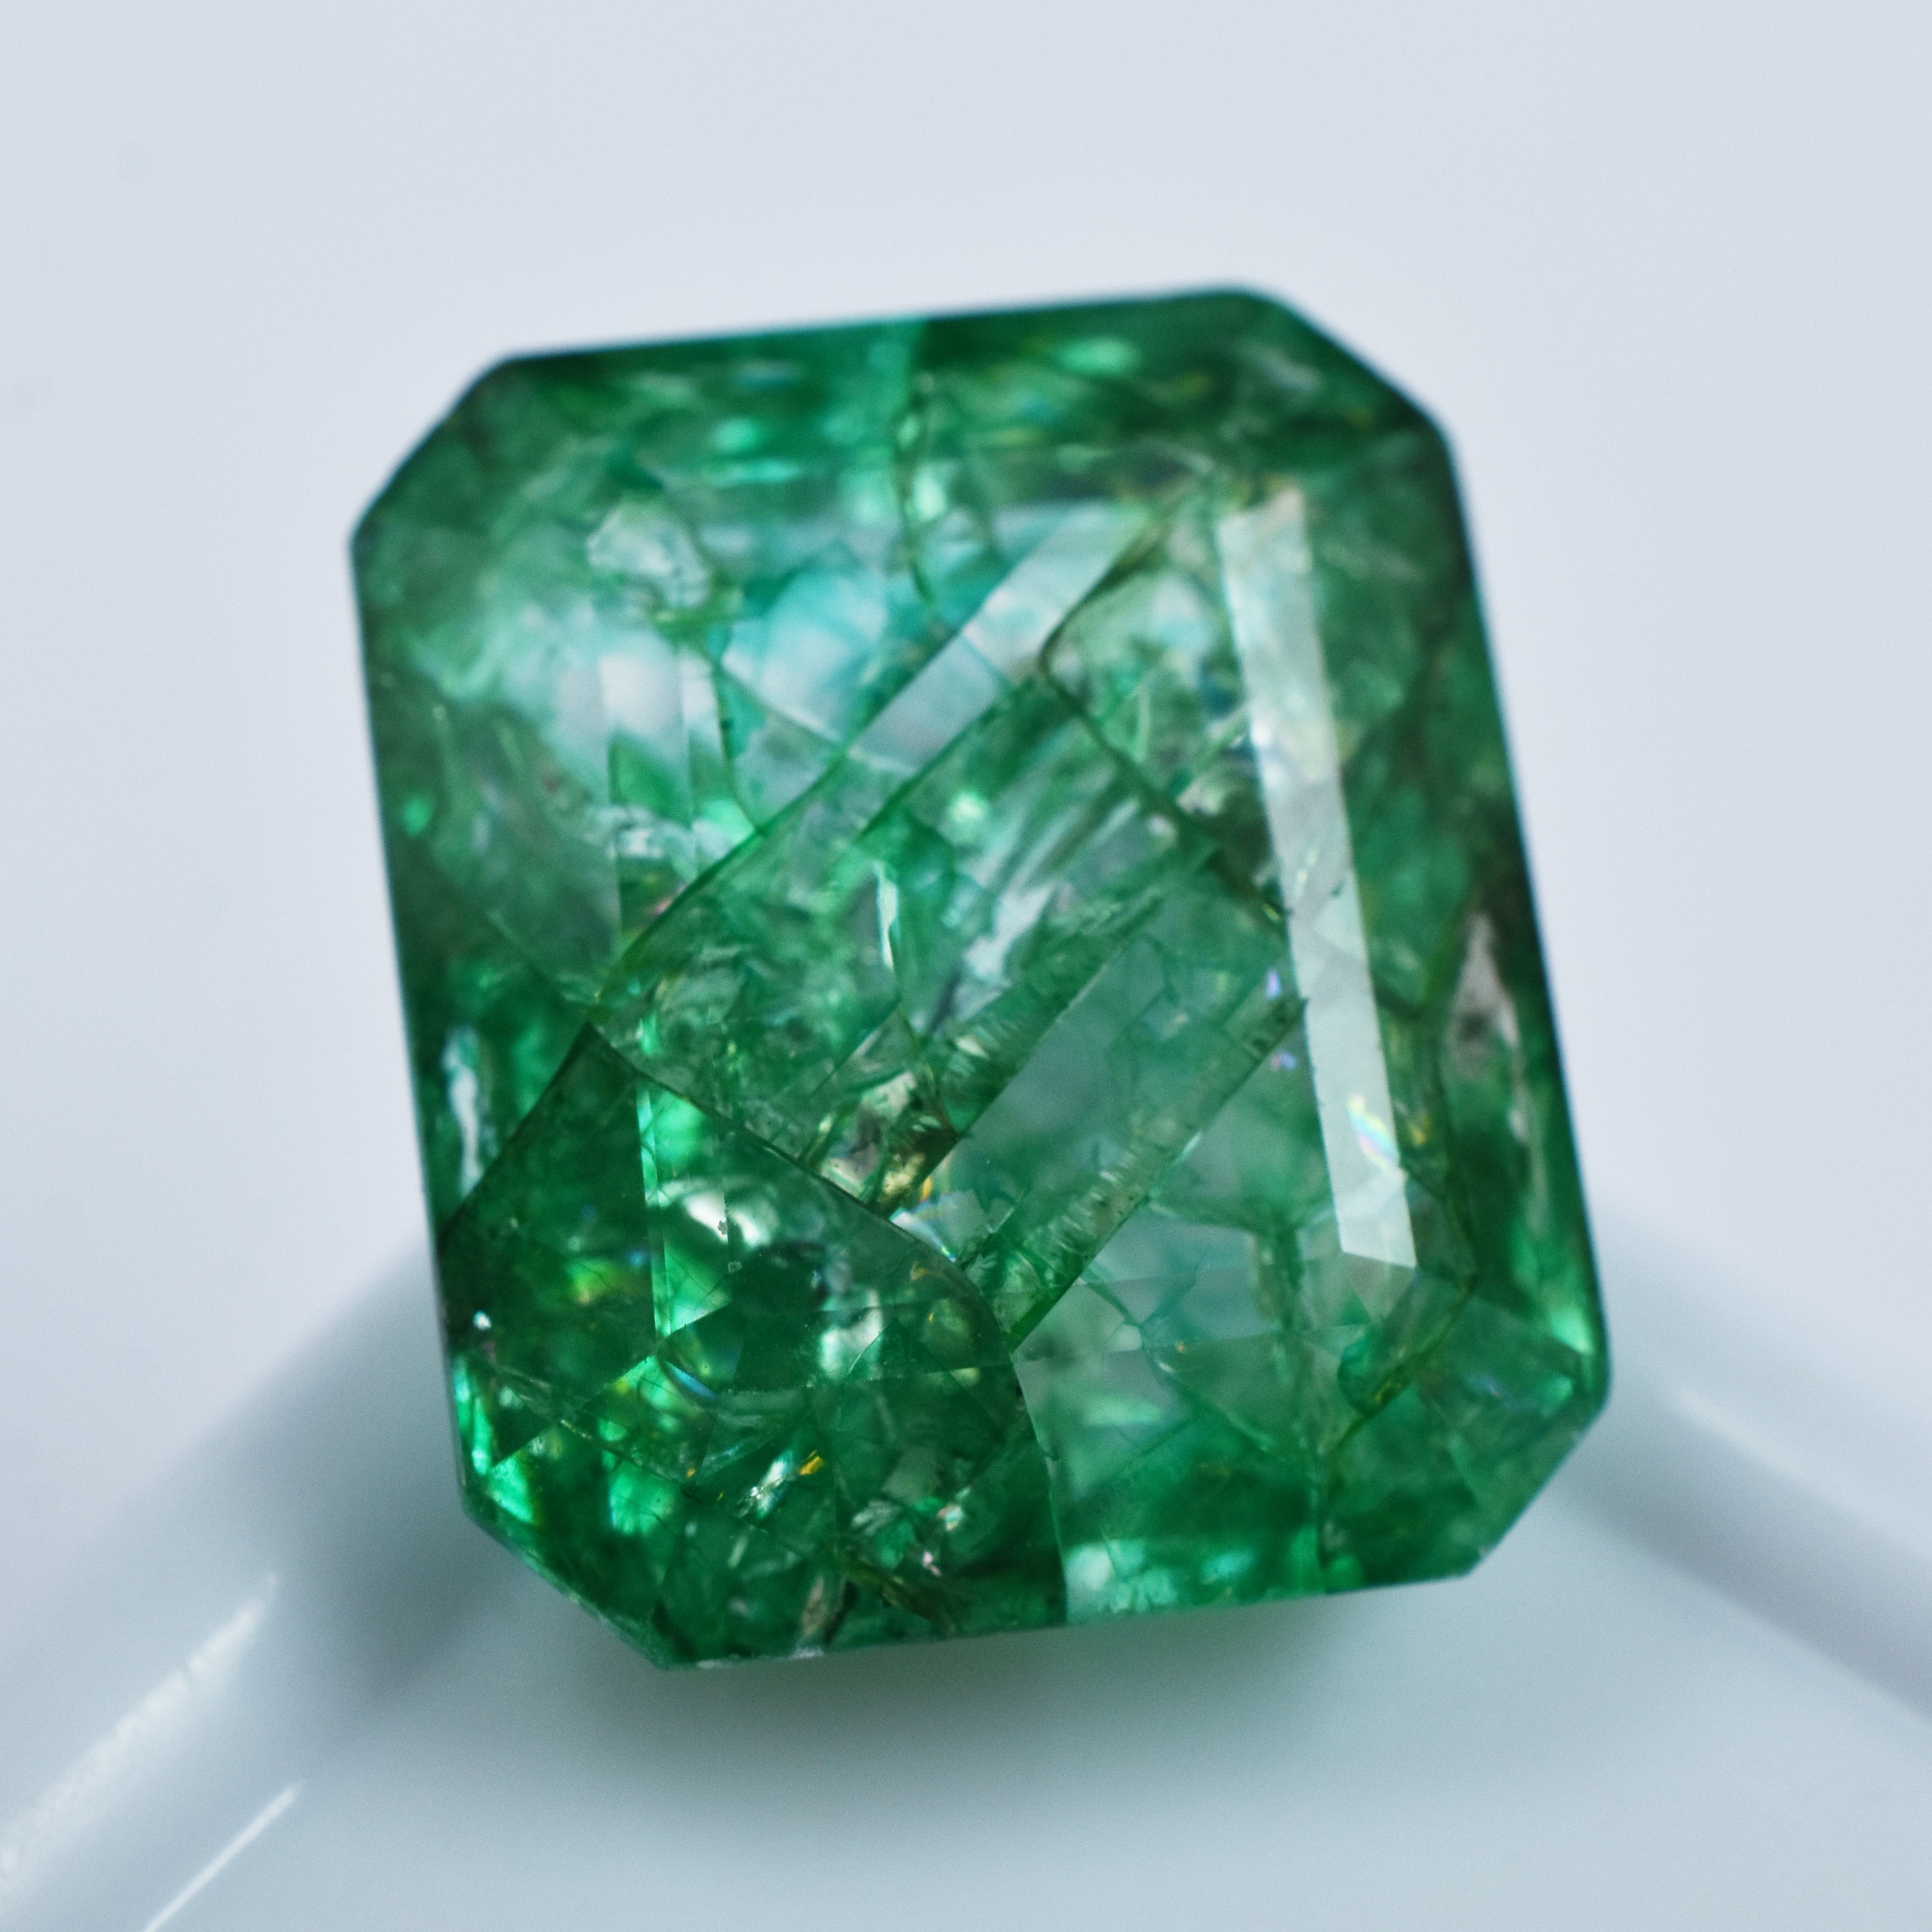 10.55 Carat Emerald Cut Emerald Green Natural CERTIFIED Loose Gemstone | Free Delivery Free Gift | Best Price